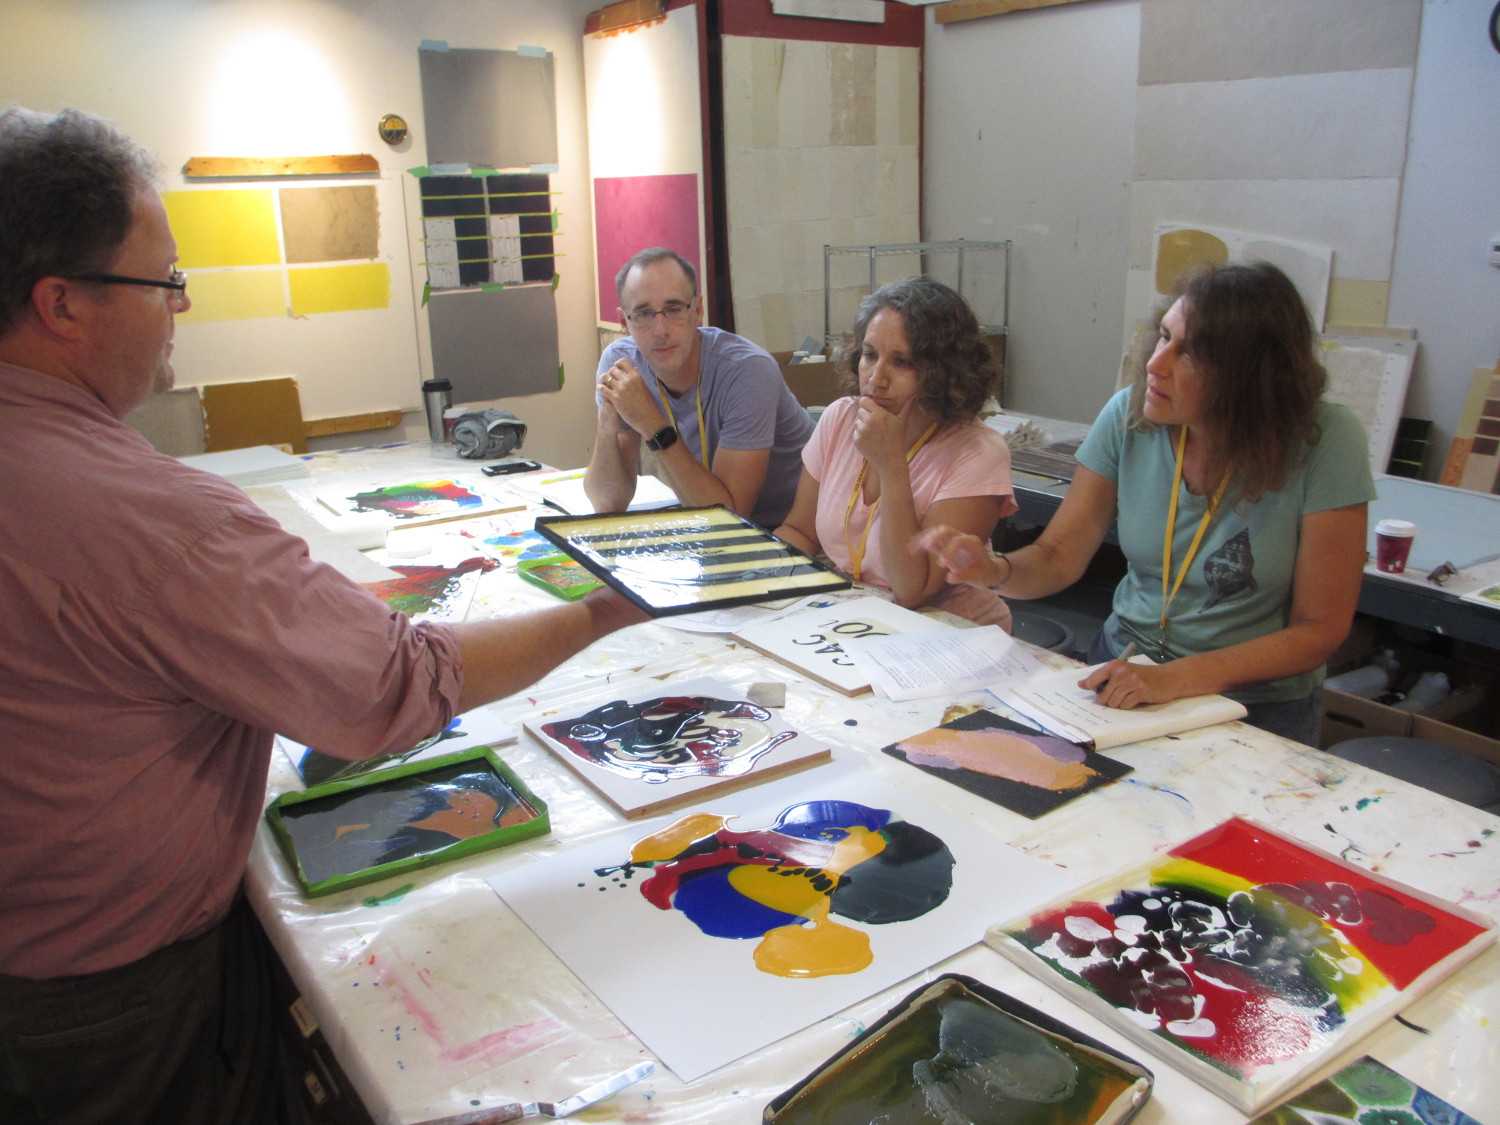 GOLDEN Partners With Alliance for Young Artists & Writers, Hosting Three Art Educators at Artist Residency